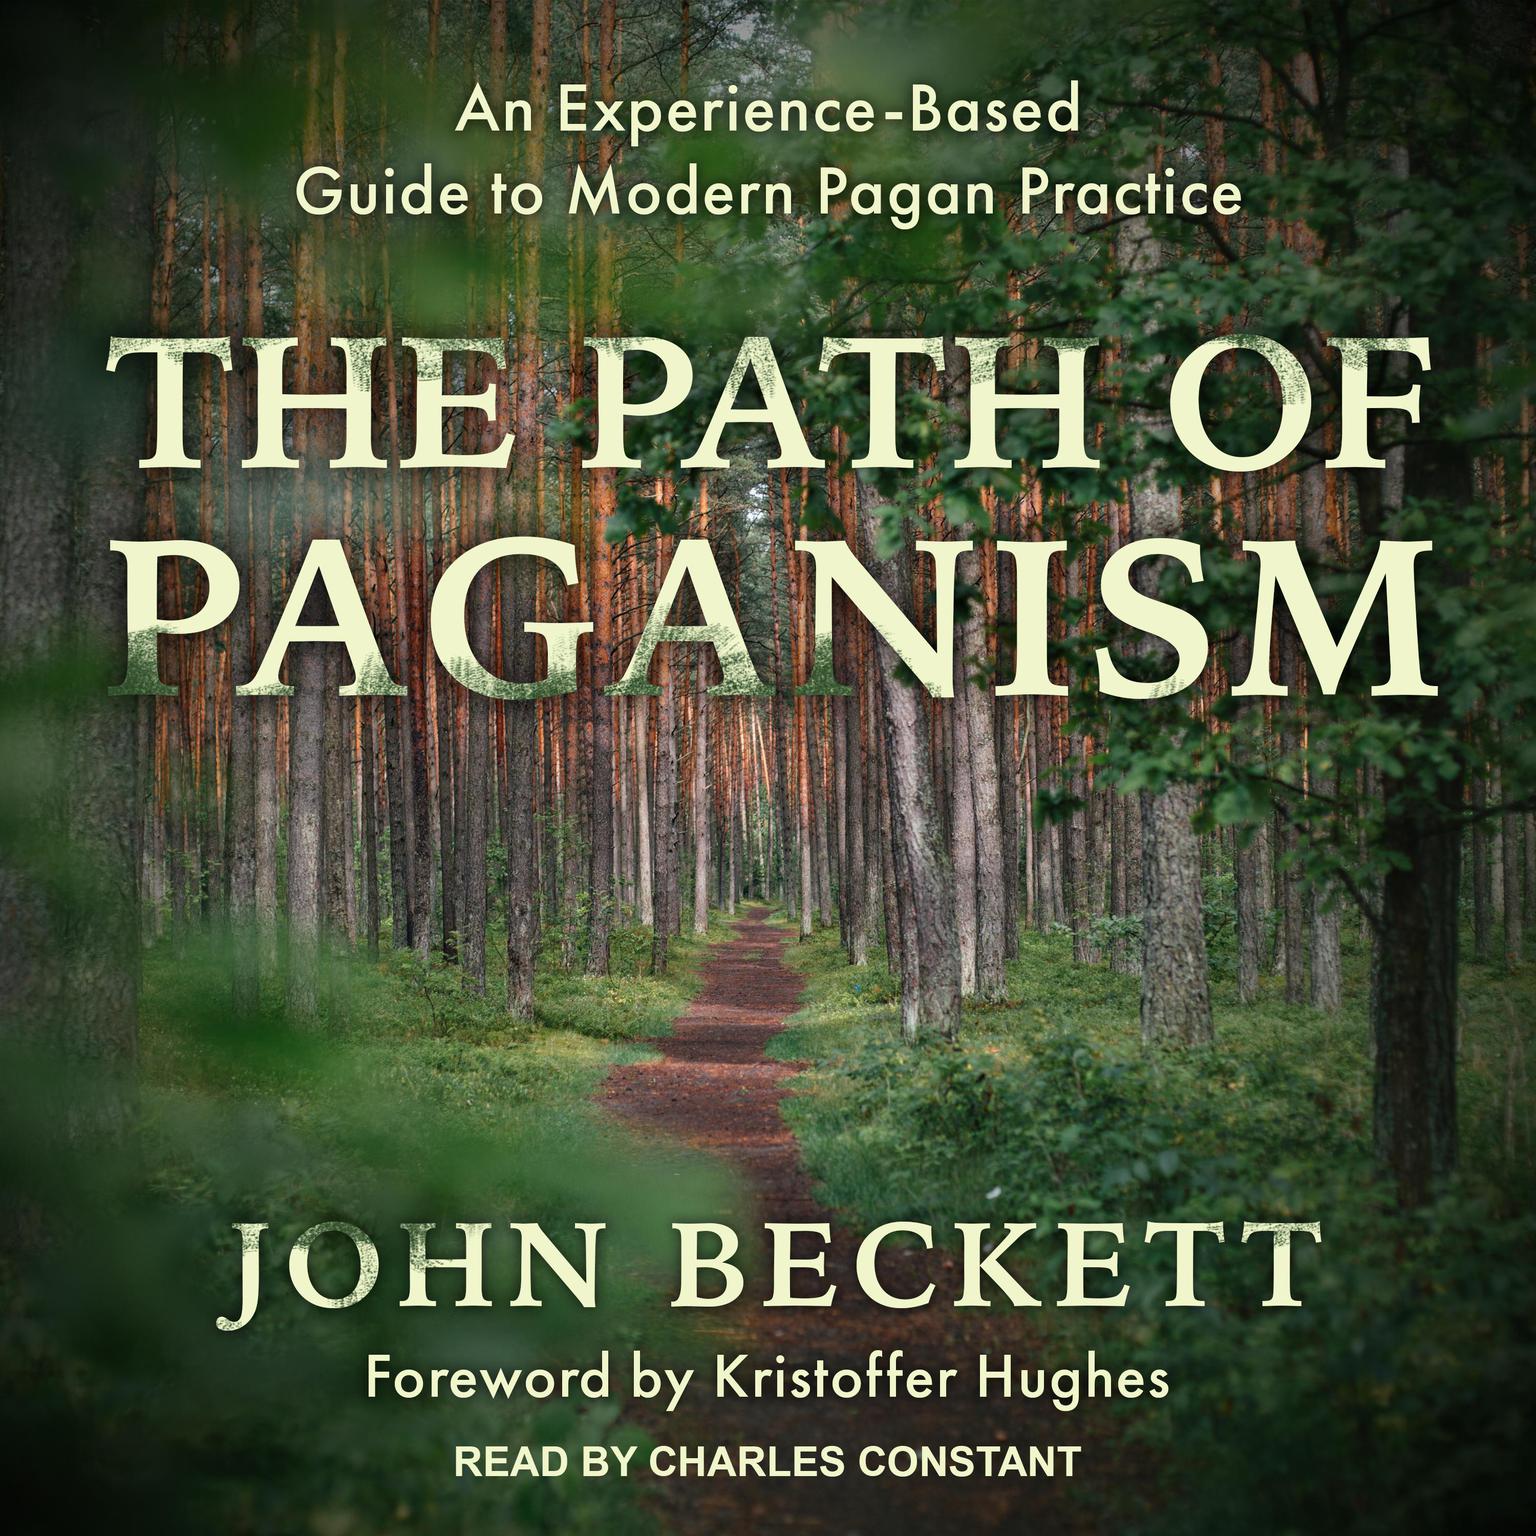 The Path of Paganism: An Experience-Based Guide to Modern Pagan Practice Audiobook, by John Beckett